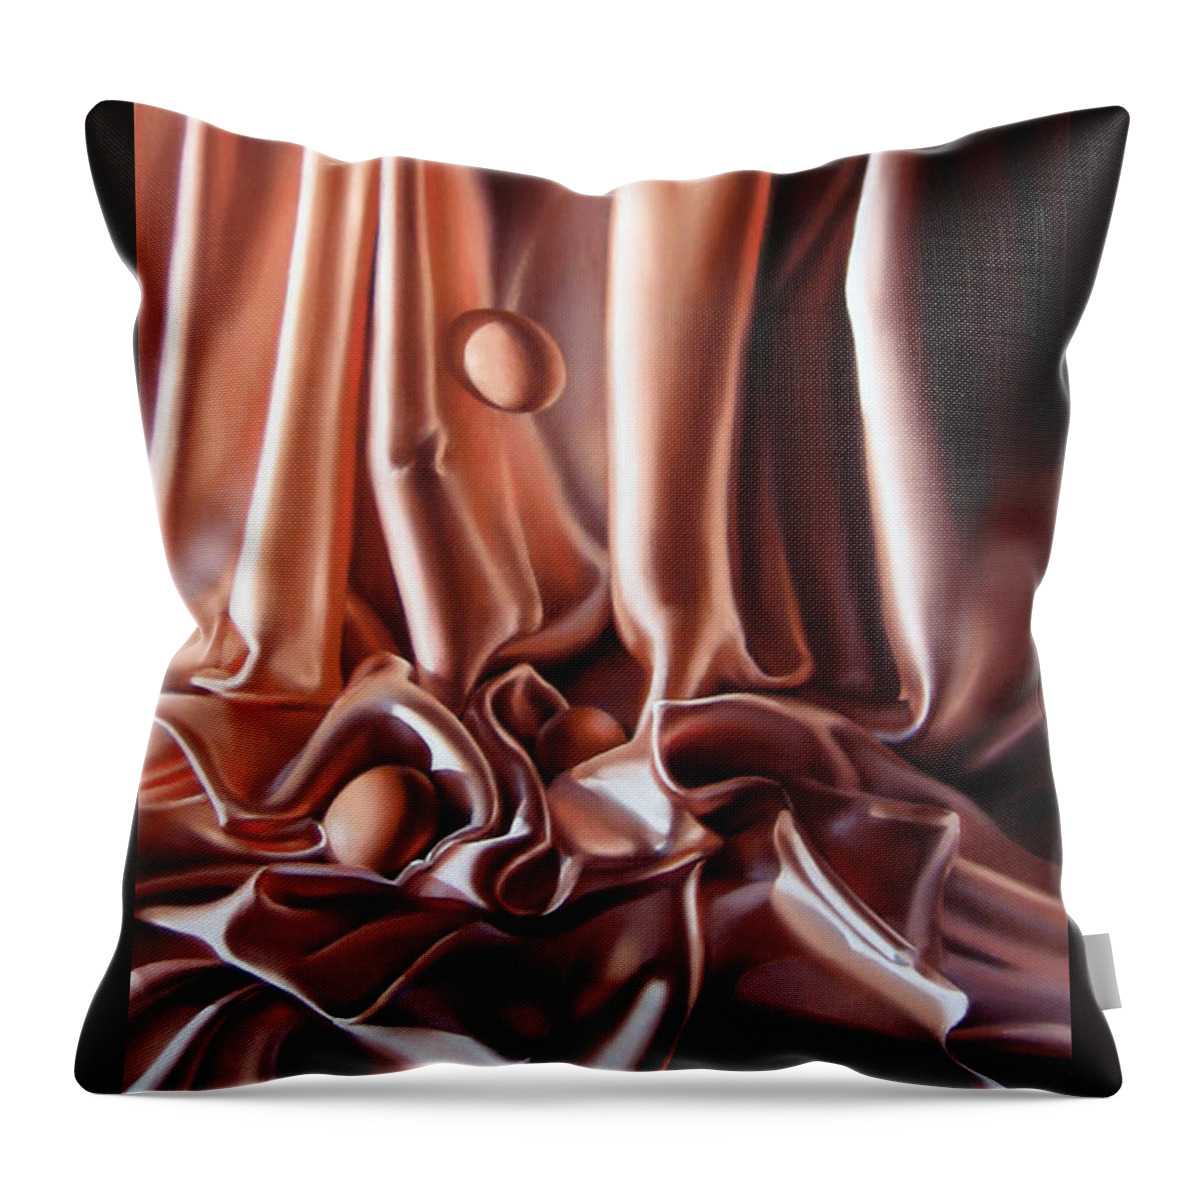 Eggs Throw Pillow featuring the painting Egg Falls by Dianna Ponting